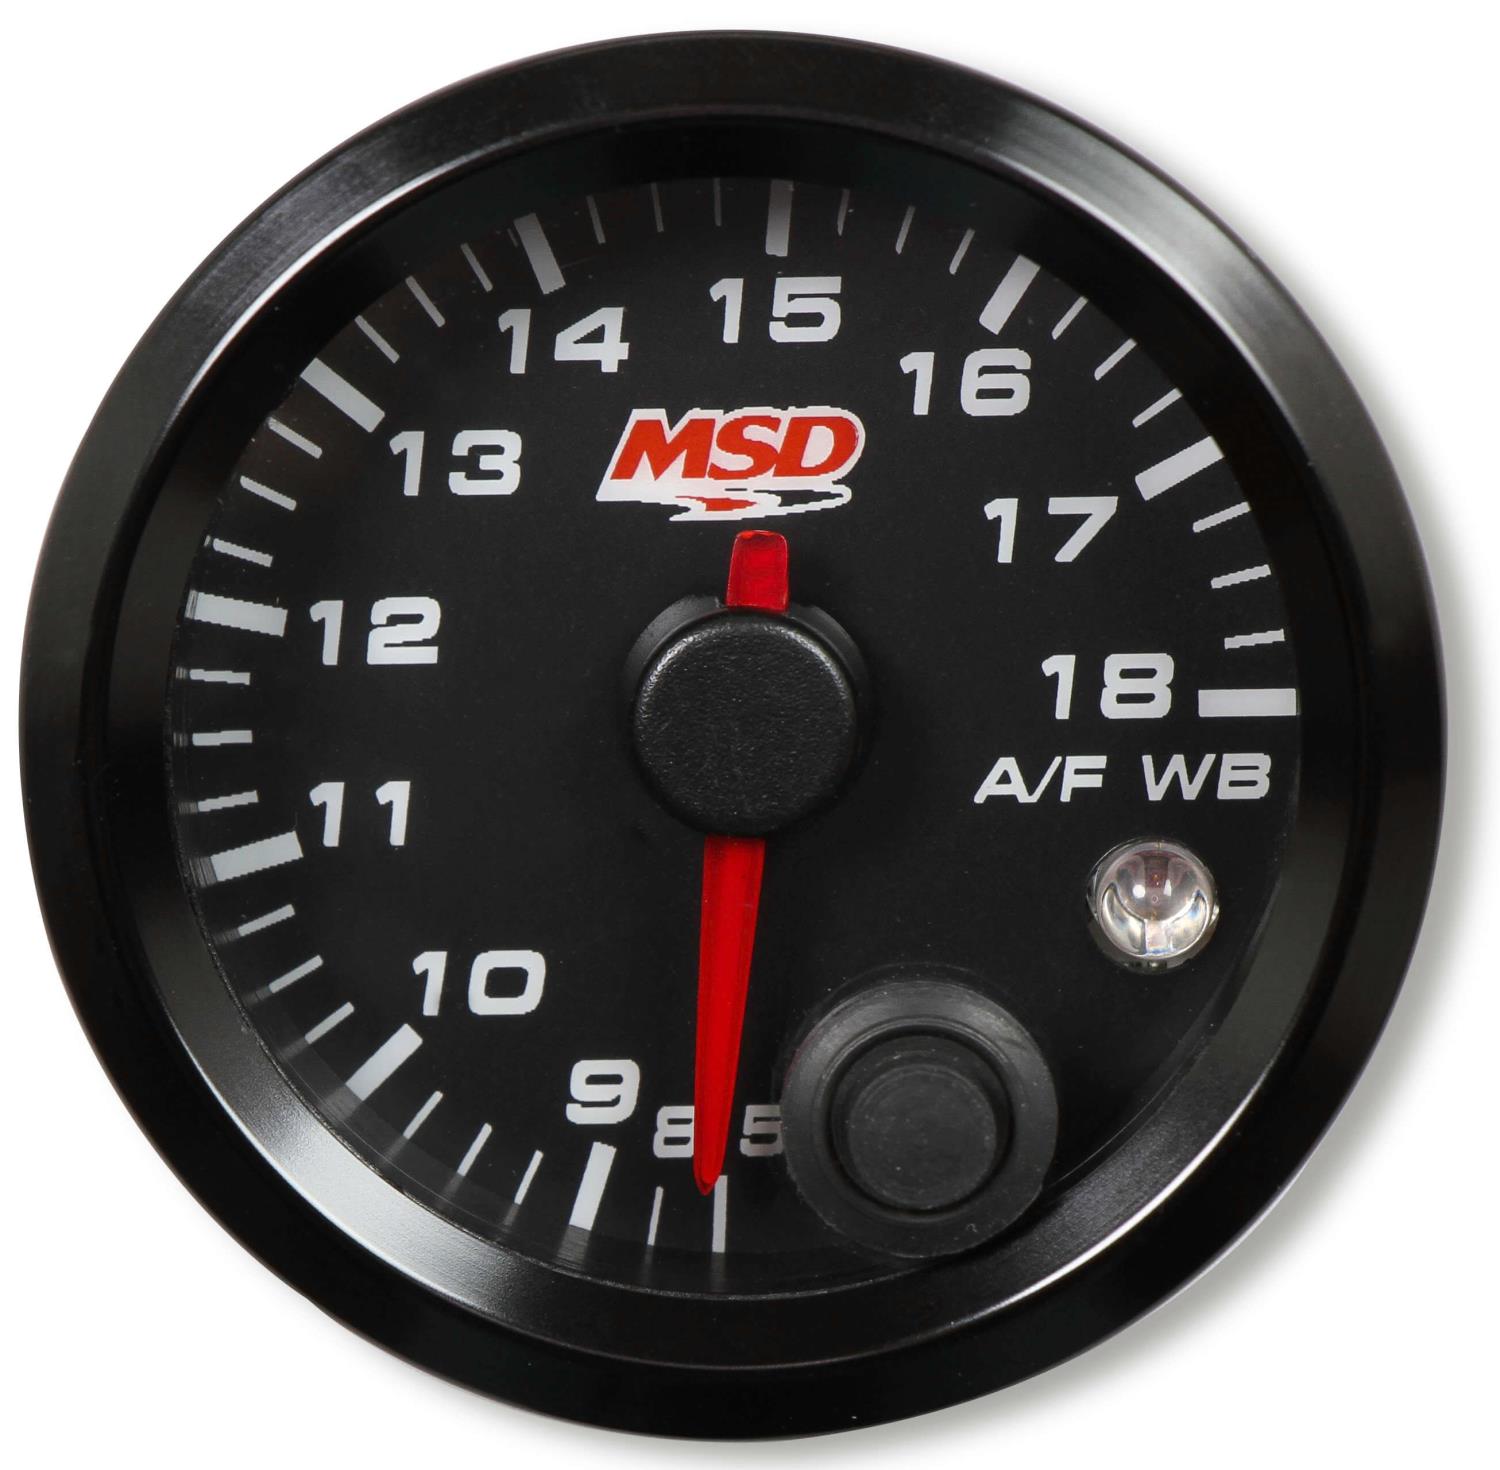 2 1/16 in. Analog Wideband Air/Fuel Ratio Gauge Kit - Black Face with Black Bezel